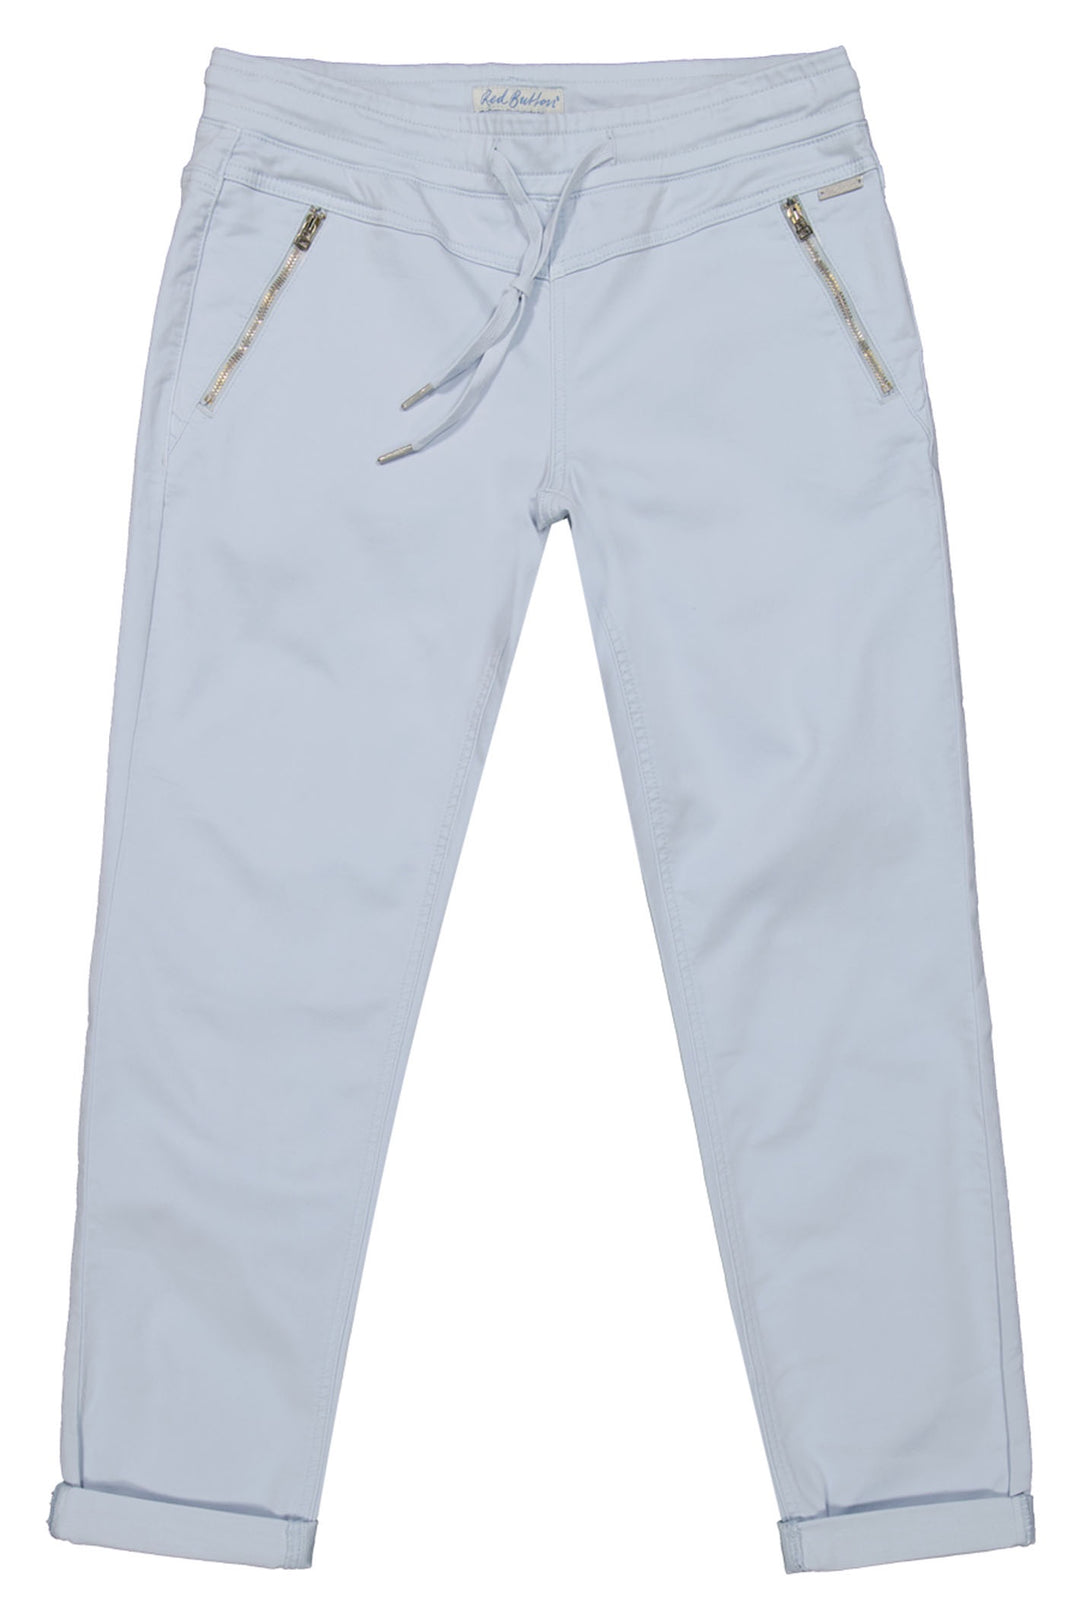 Red Button SRB3936 Tessy Sky Blue Crop Jogger Trousers - Dotique